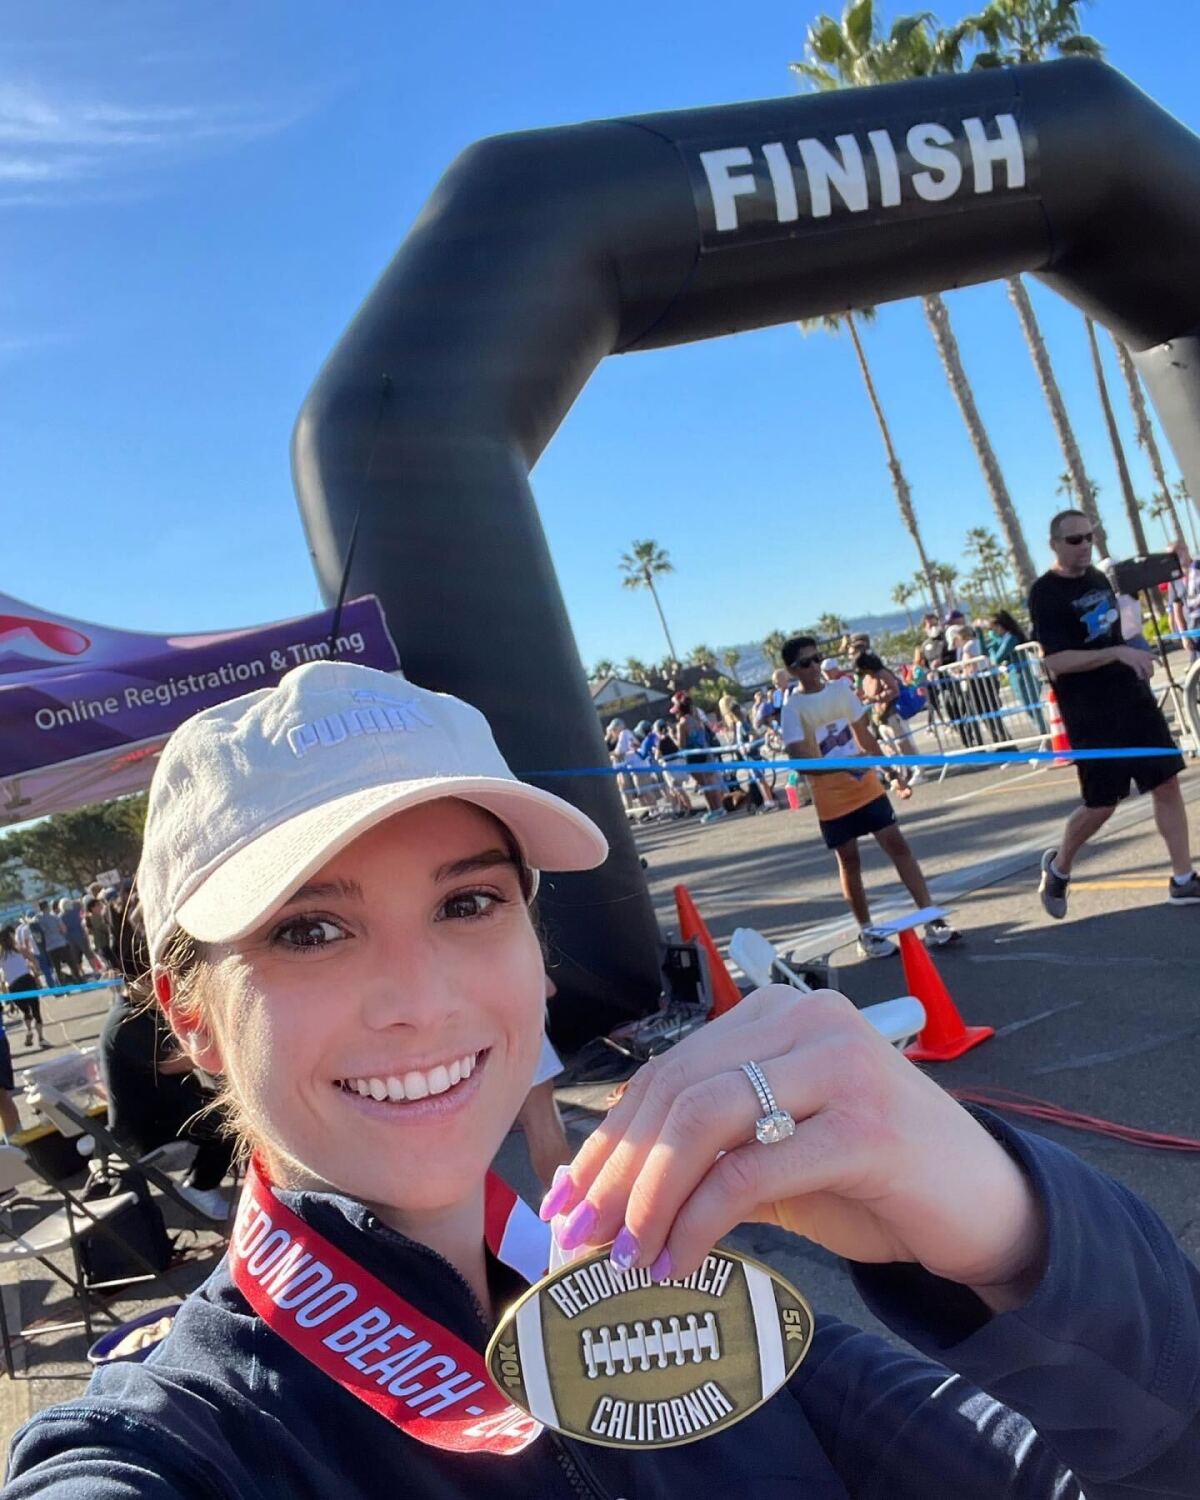 A woman holds up her 10k medal at the finish line of the 10k race.